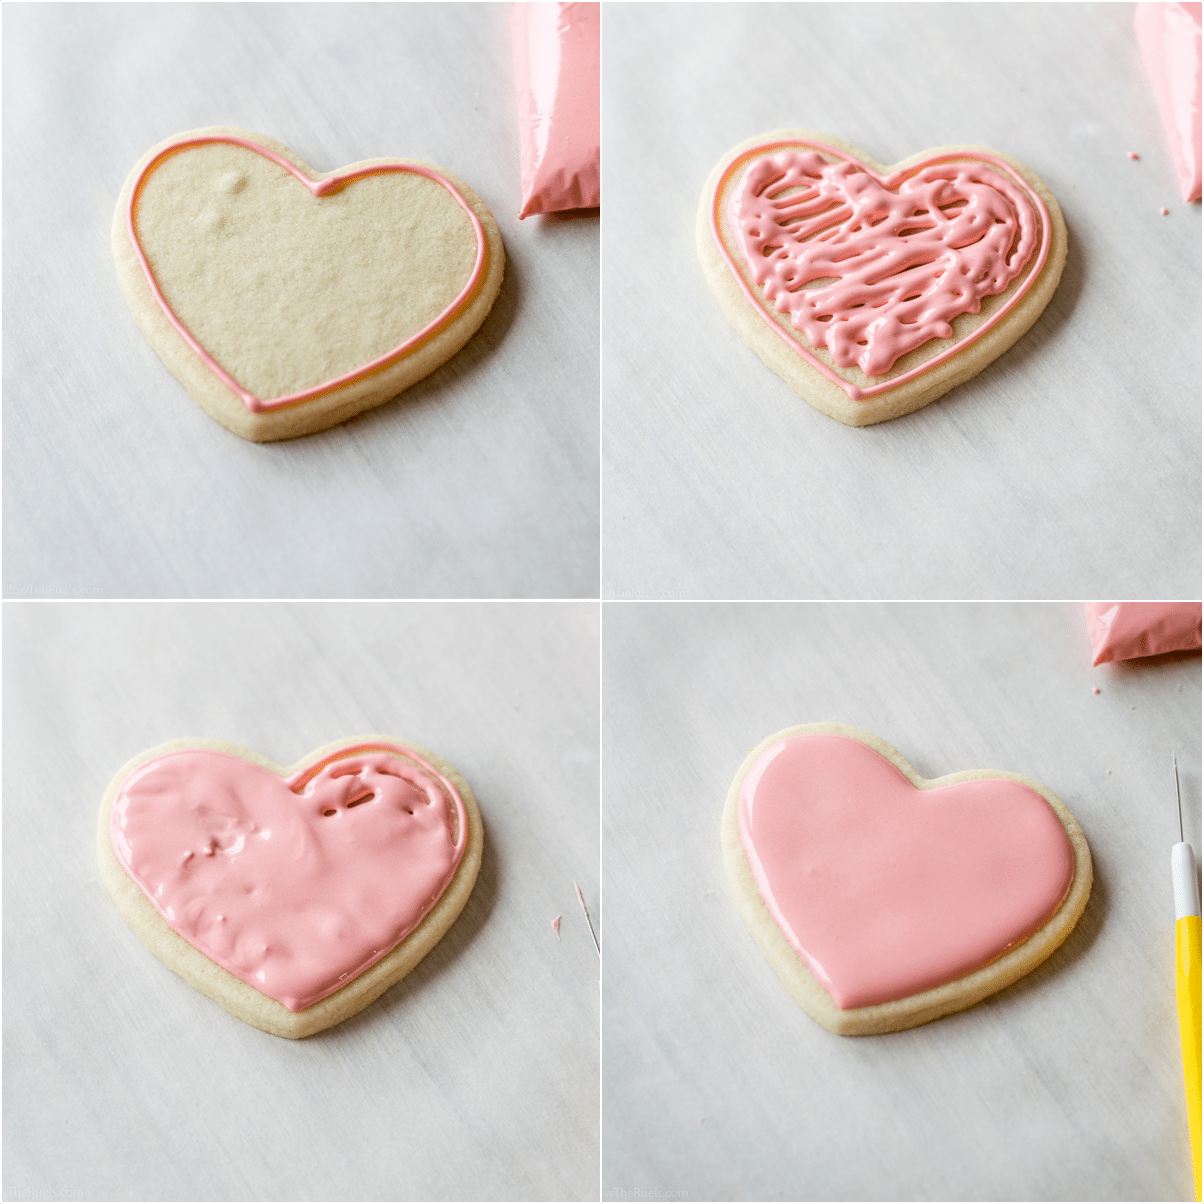 The Best Royal Icing For Decorating Cookies